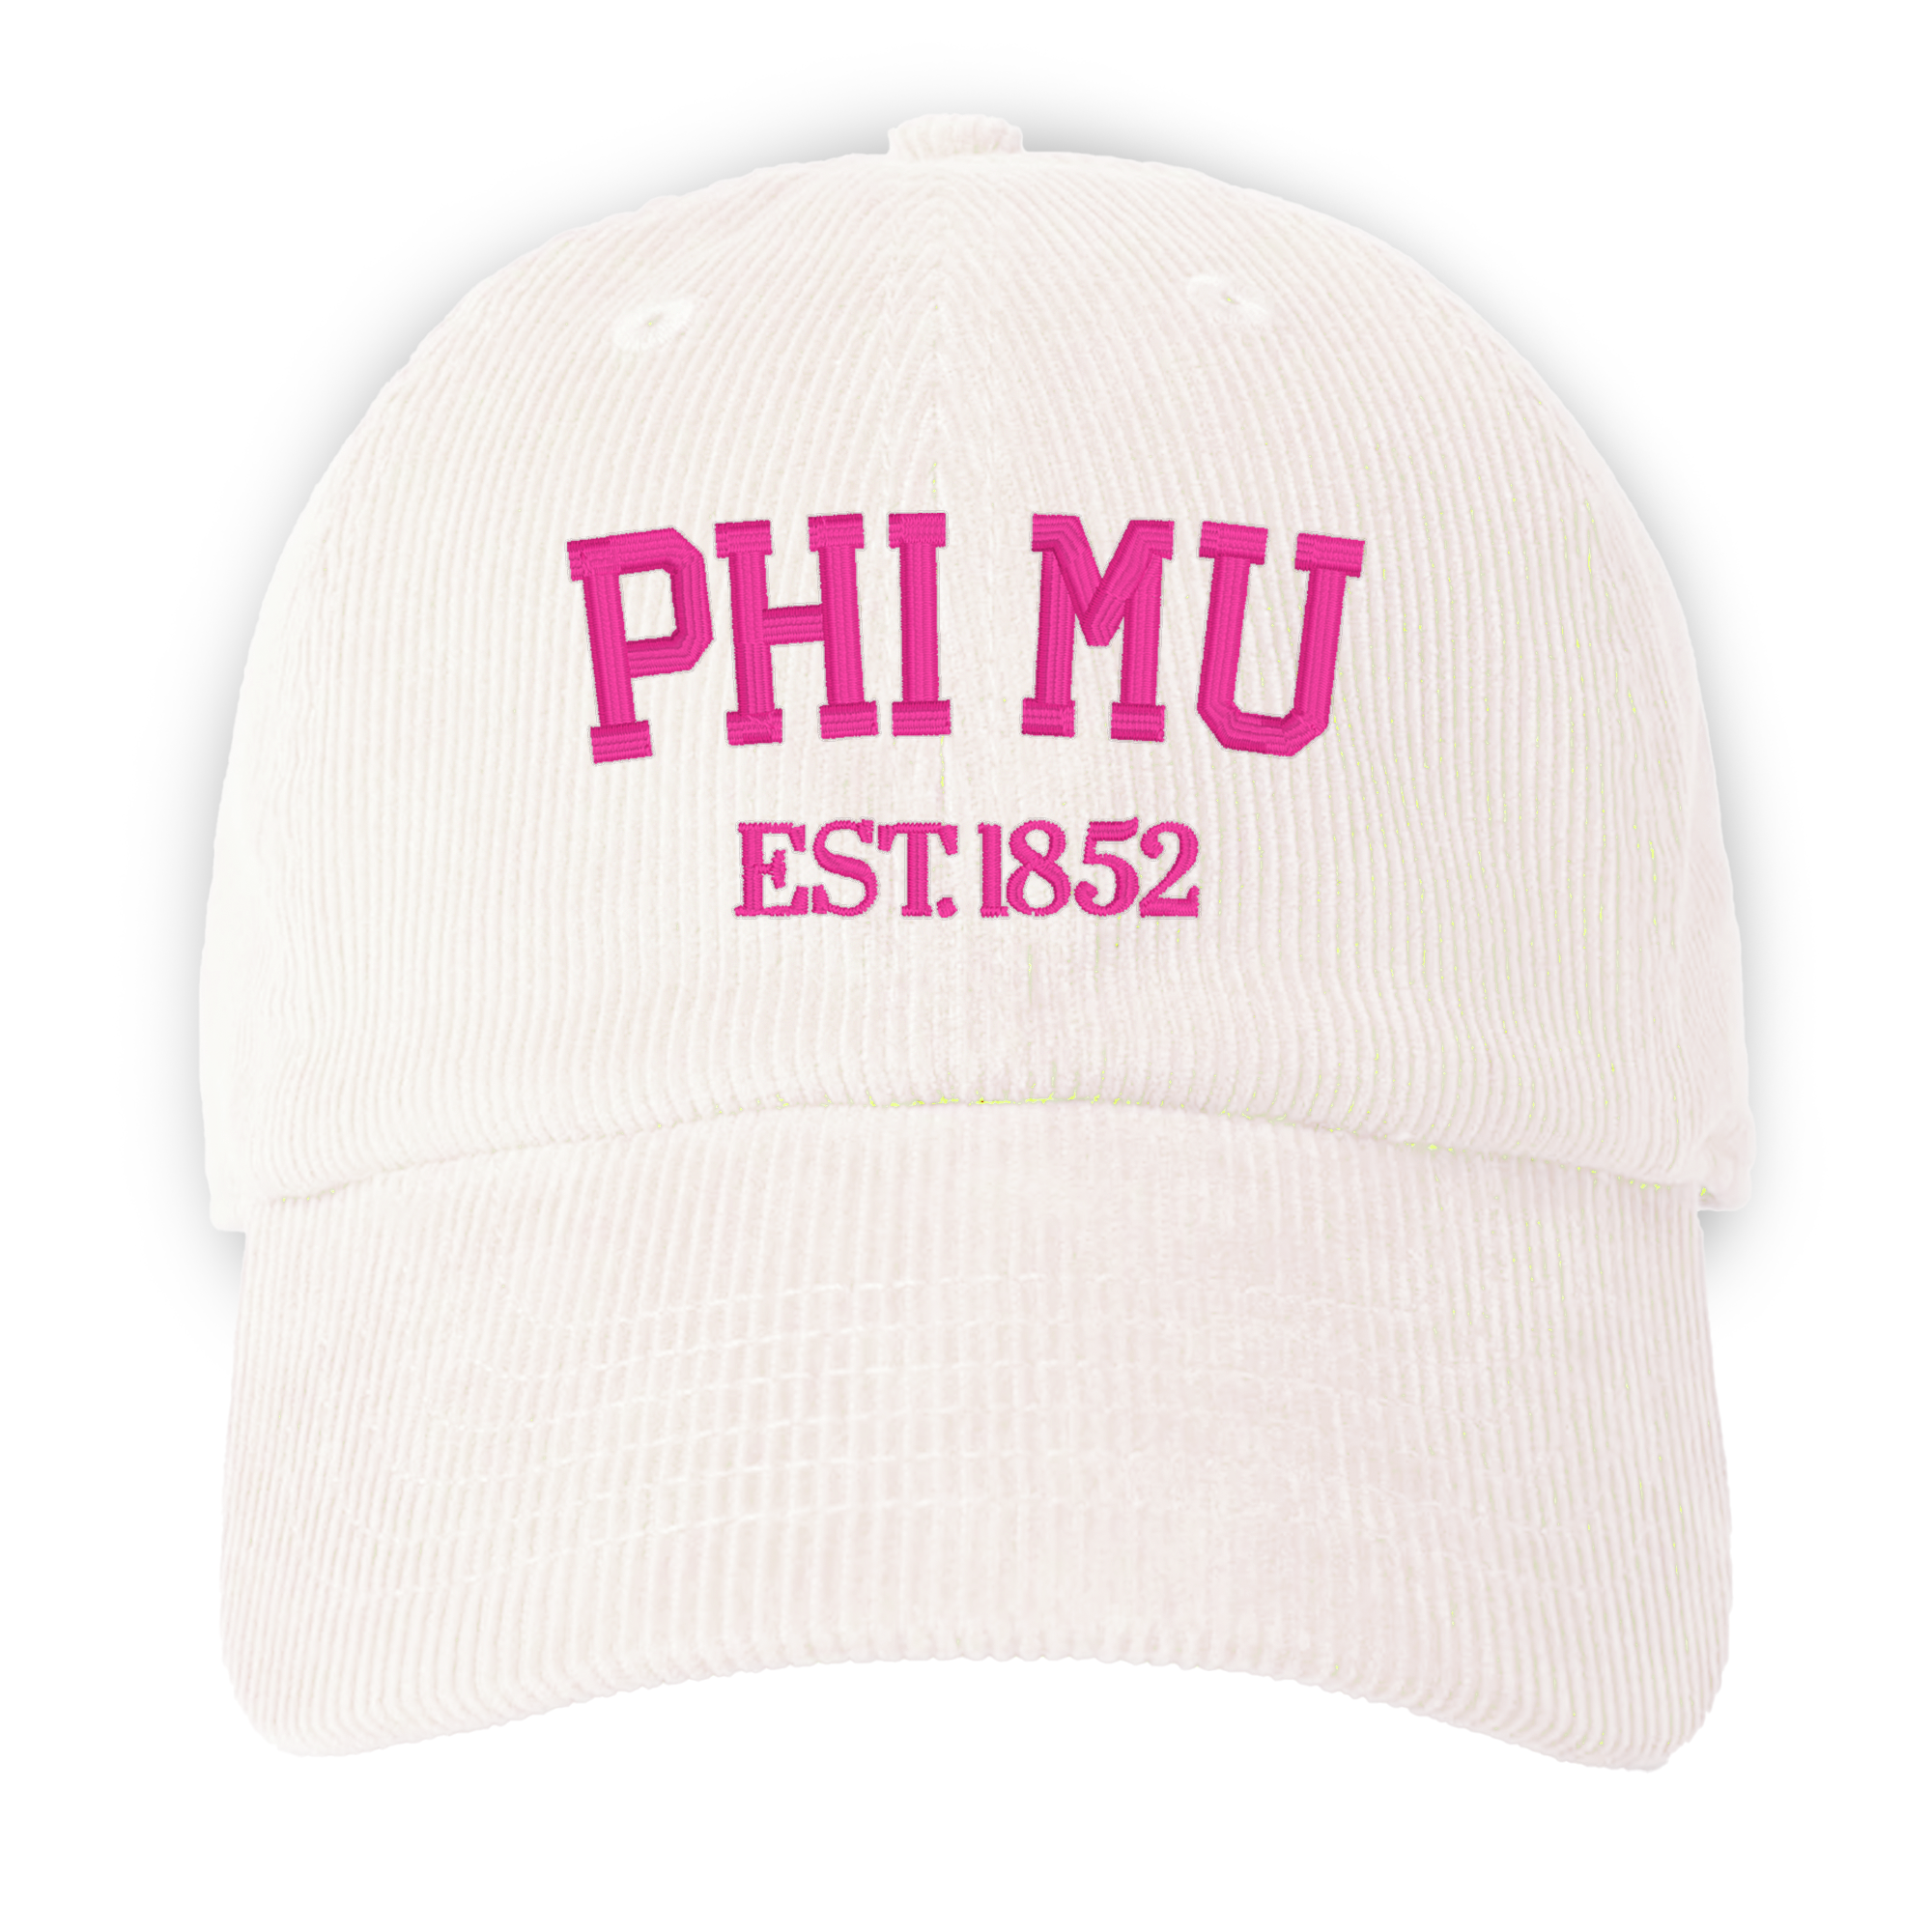 a white hat with pink lettering on it